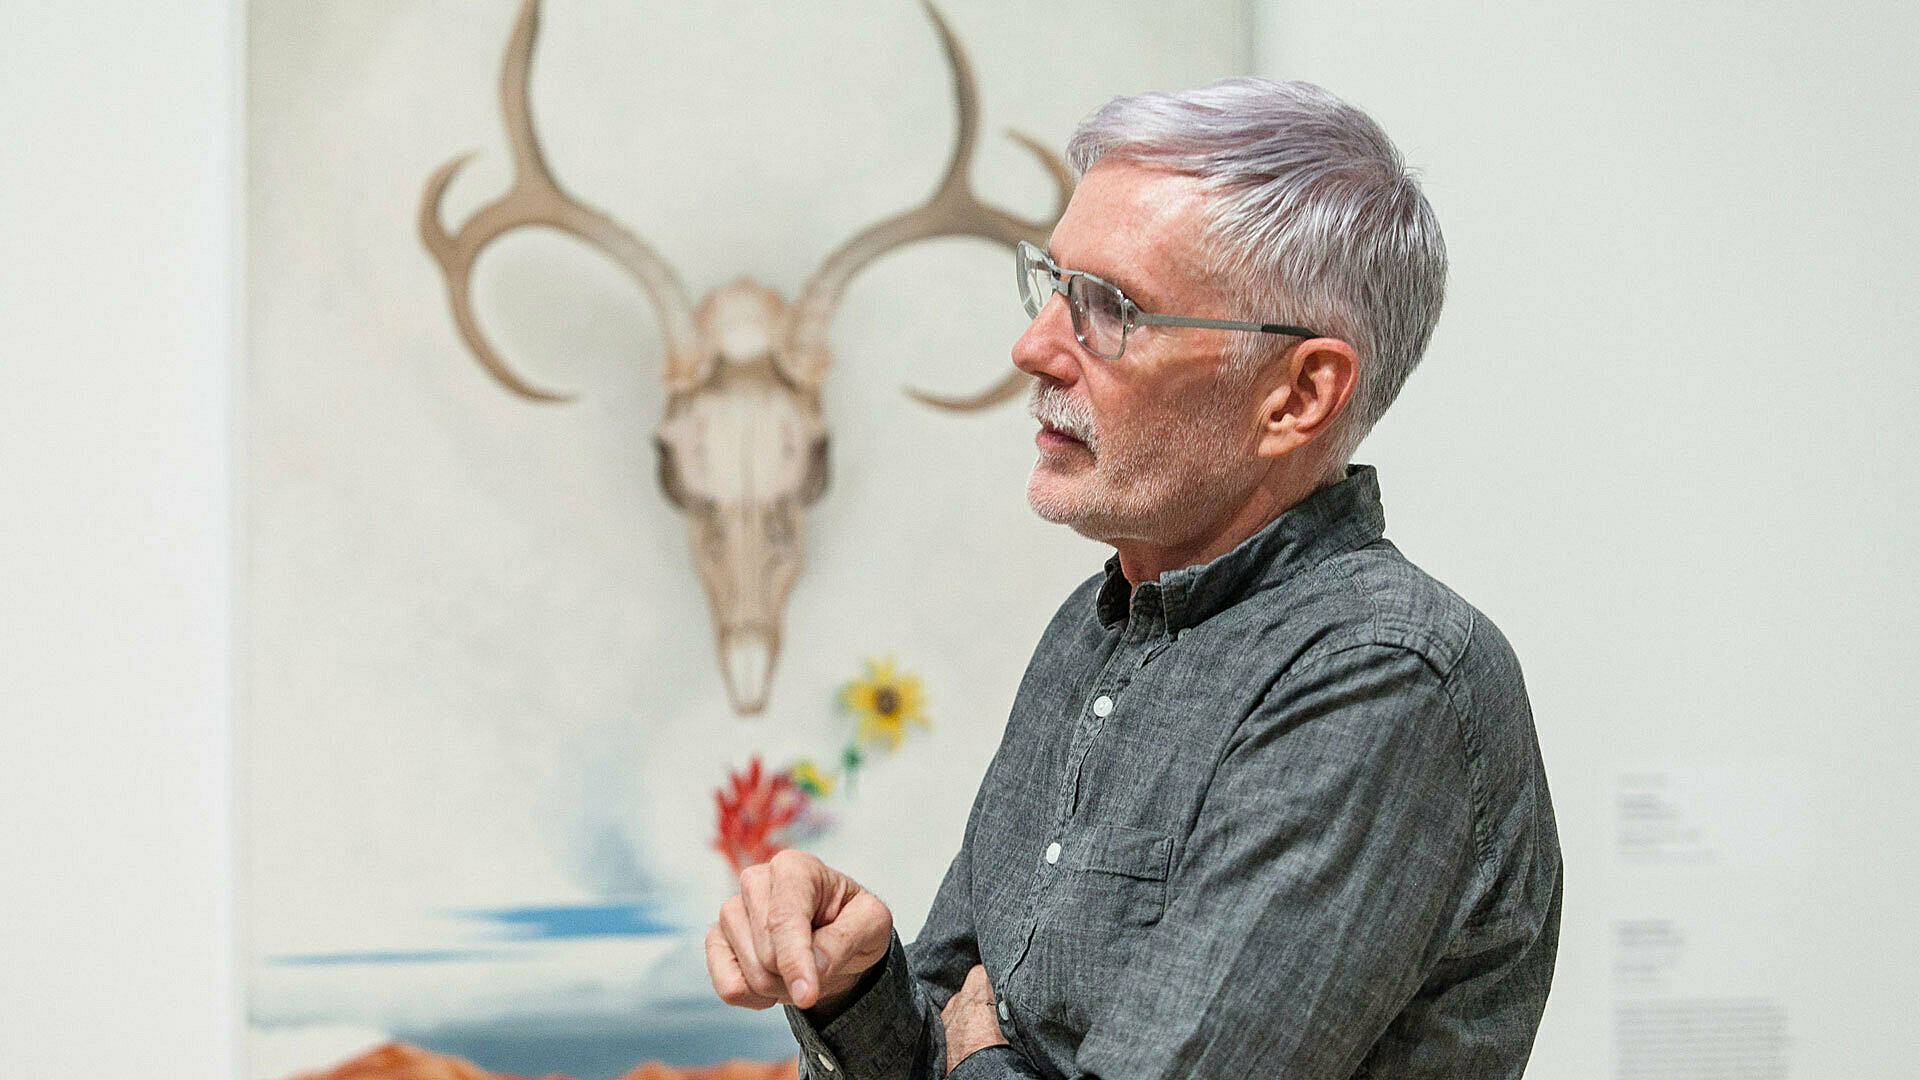 Buck talking in front of O'Keefe painting.